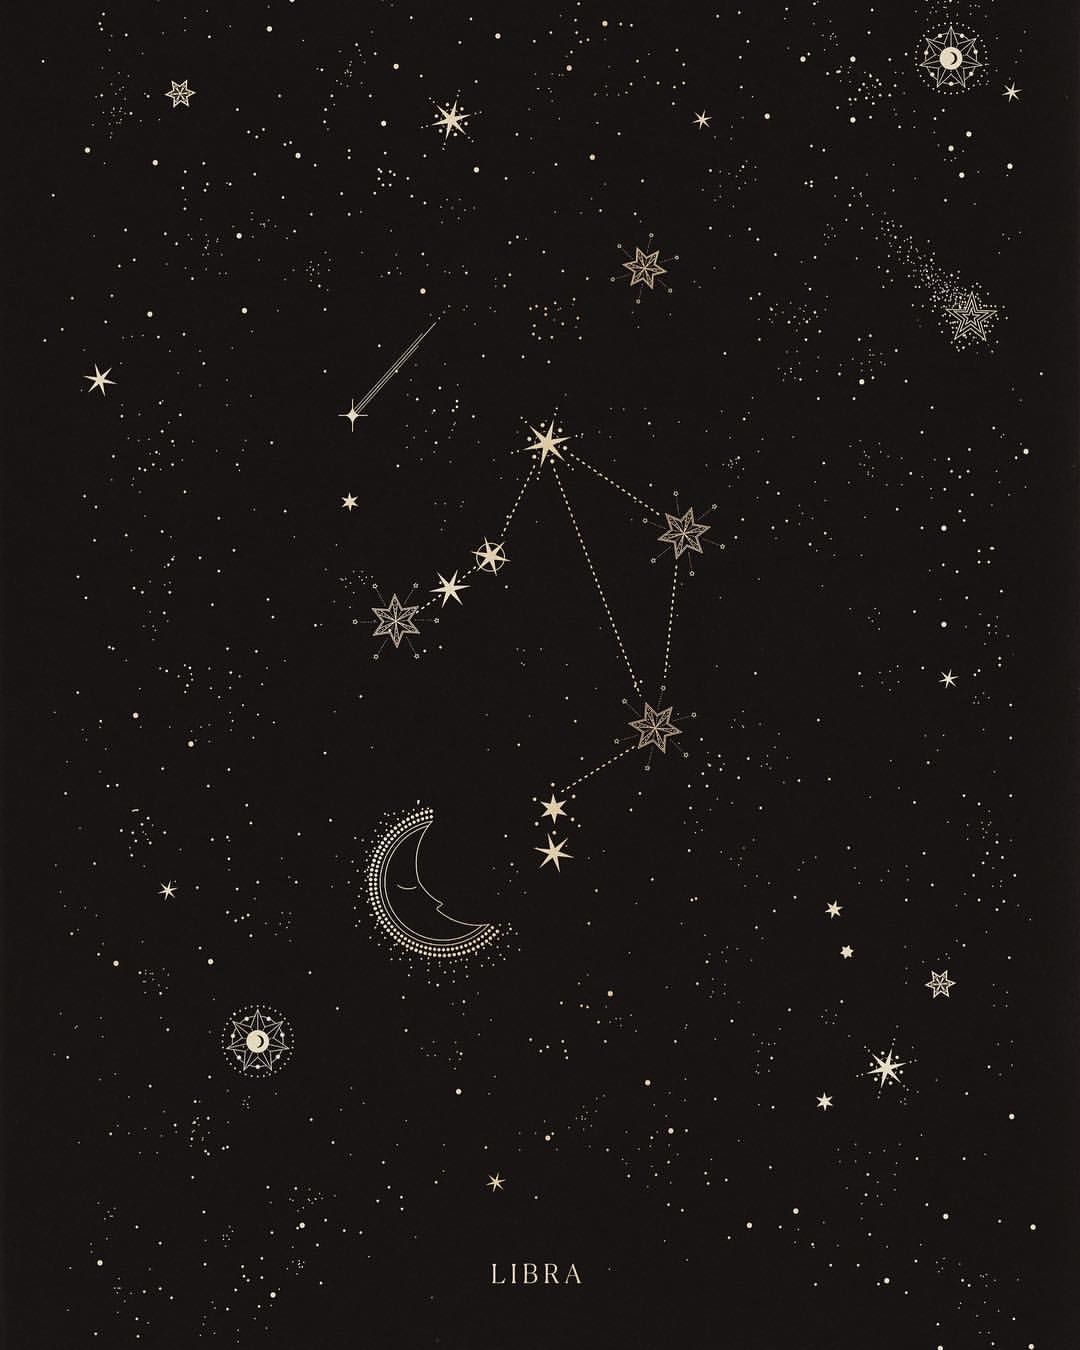 A poster of the constellation lynx - Constellation, Libra